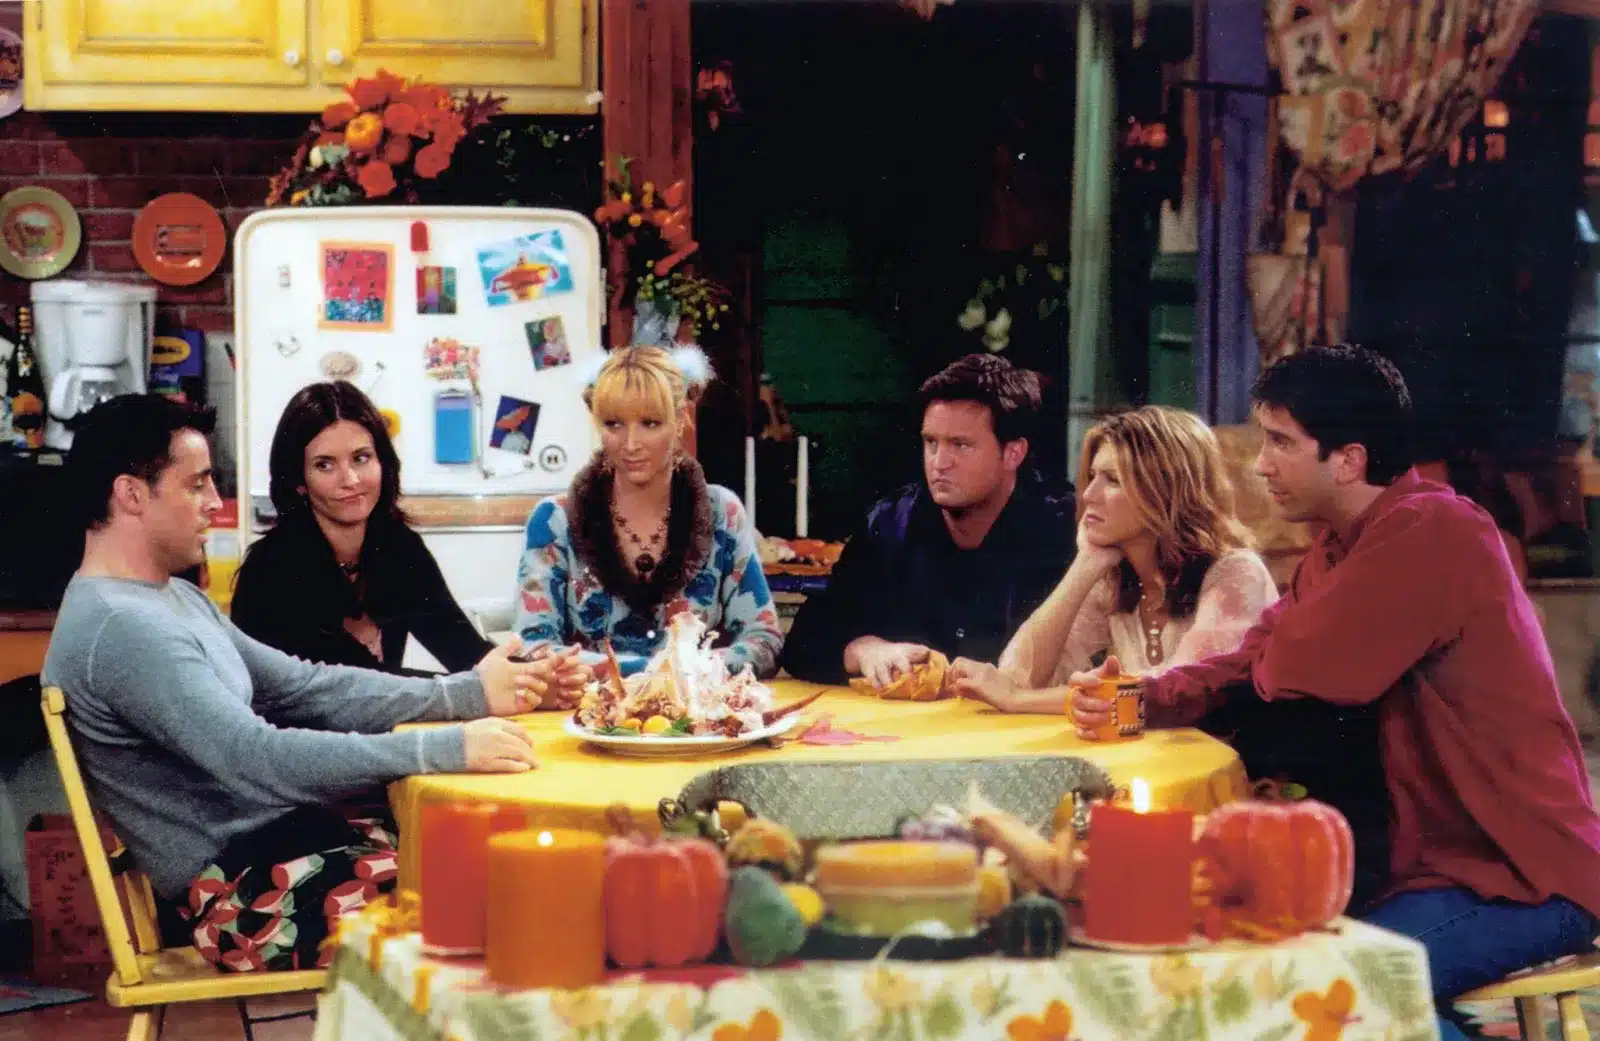 10 Best Sitcoms Of All Time